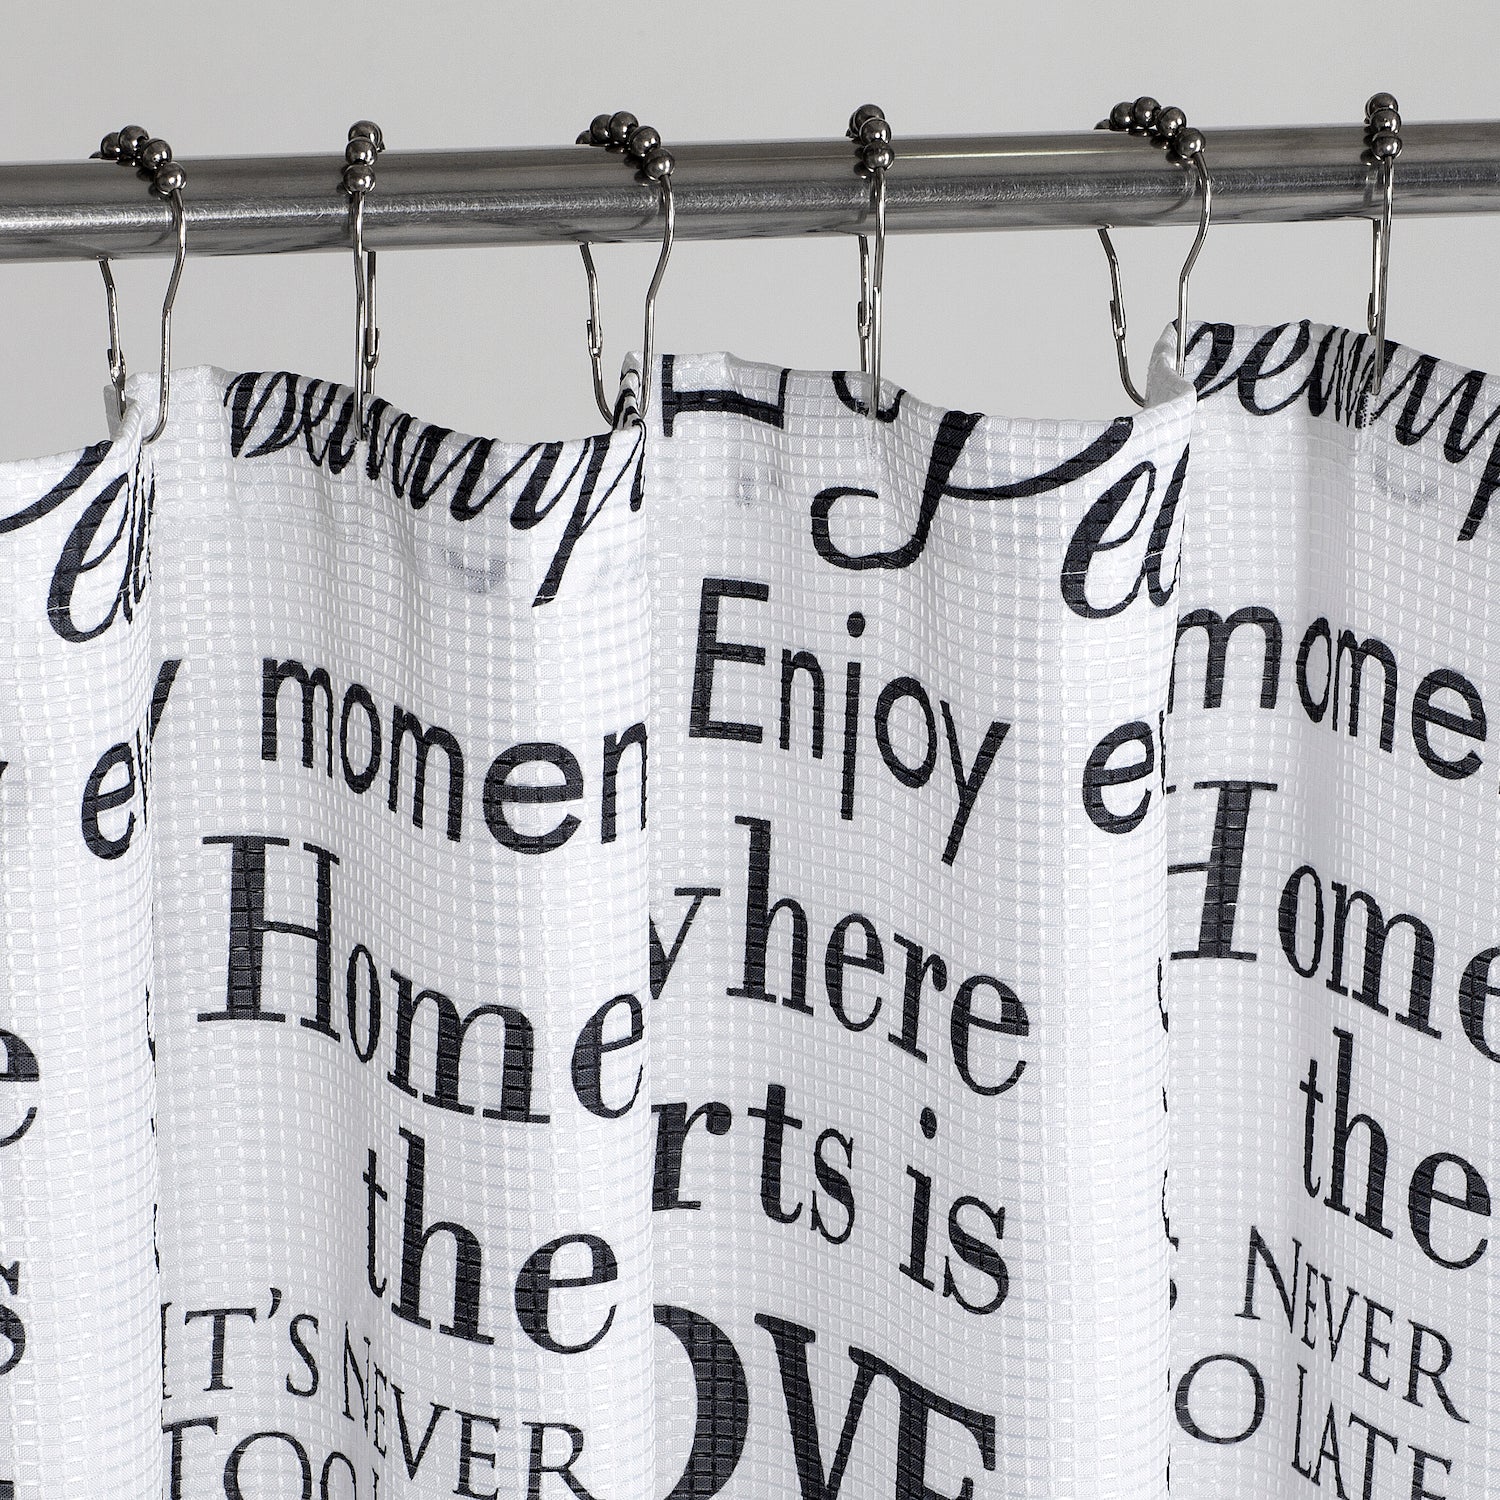 Dainty Home Printed 3D Textured Waffle Weave Textured Love Phrases Designed Fabric Shower Curtain with 12 Roller Ball Hooks Included 70" x 72"